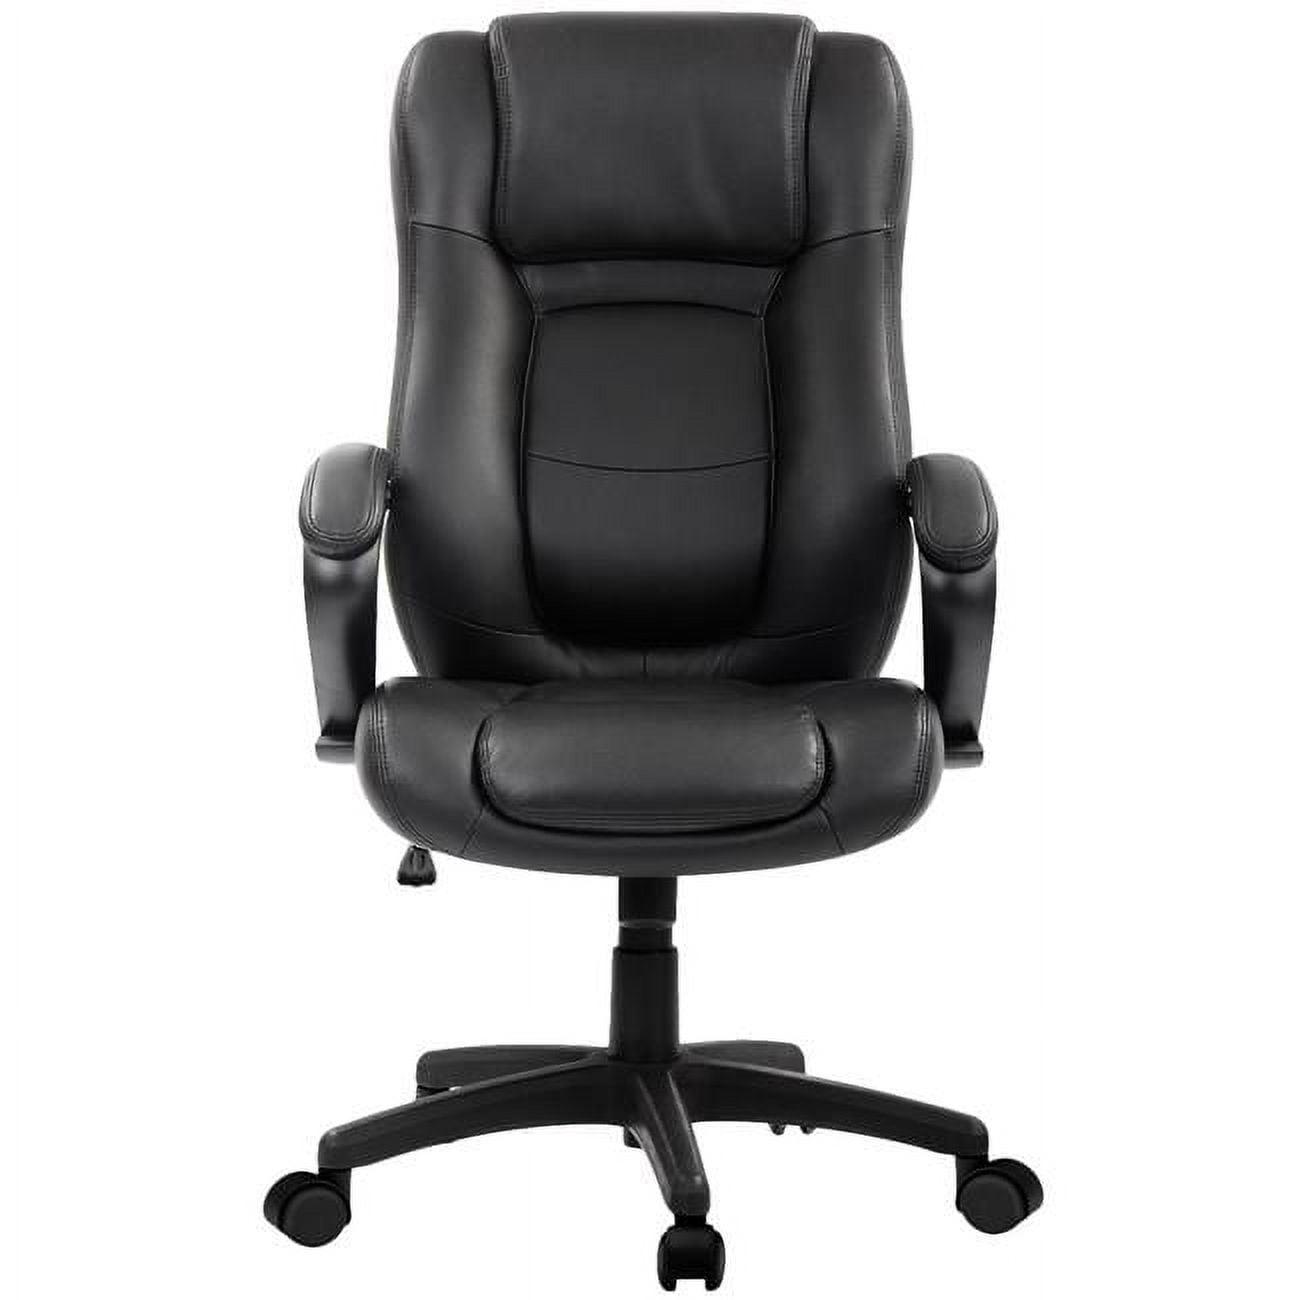 Modern High-Back Black Leather Swivel Office Chair with Adjustable Arms